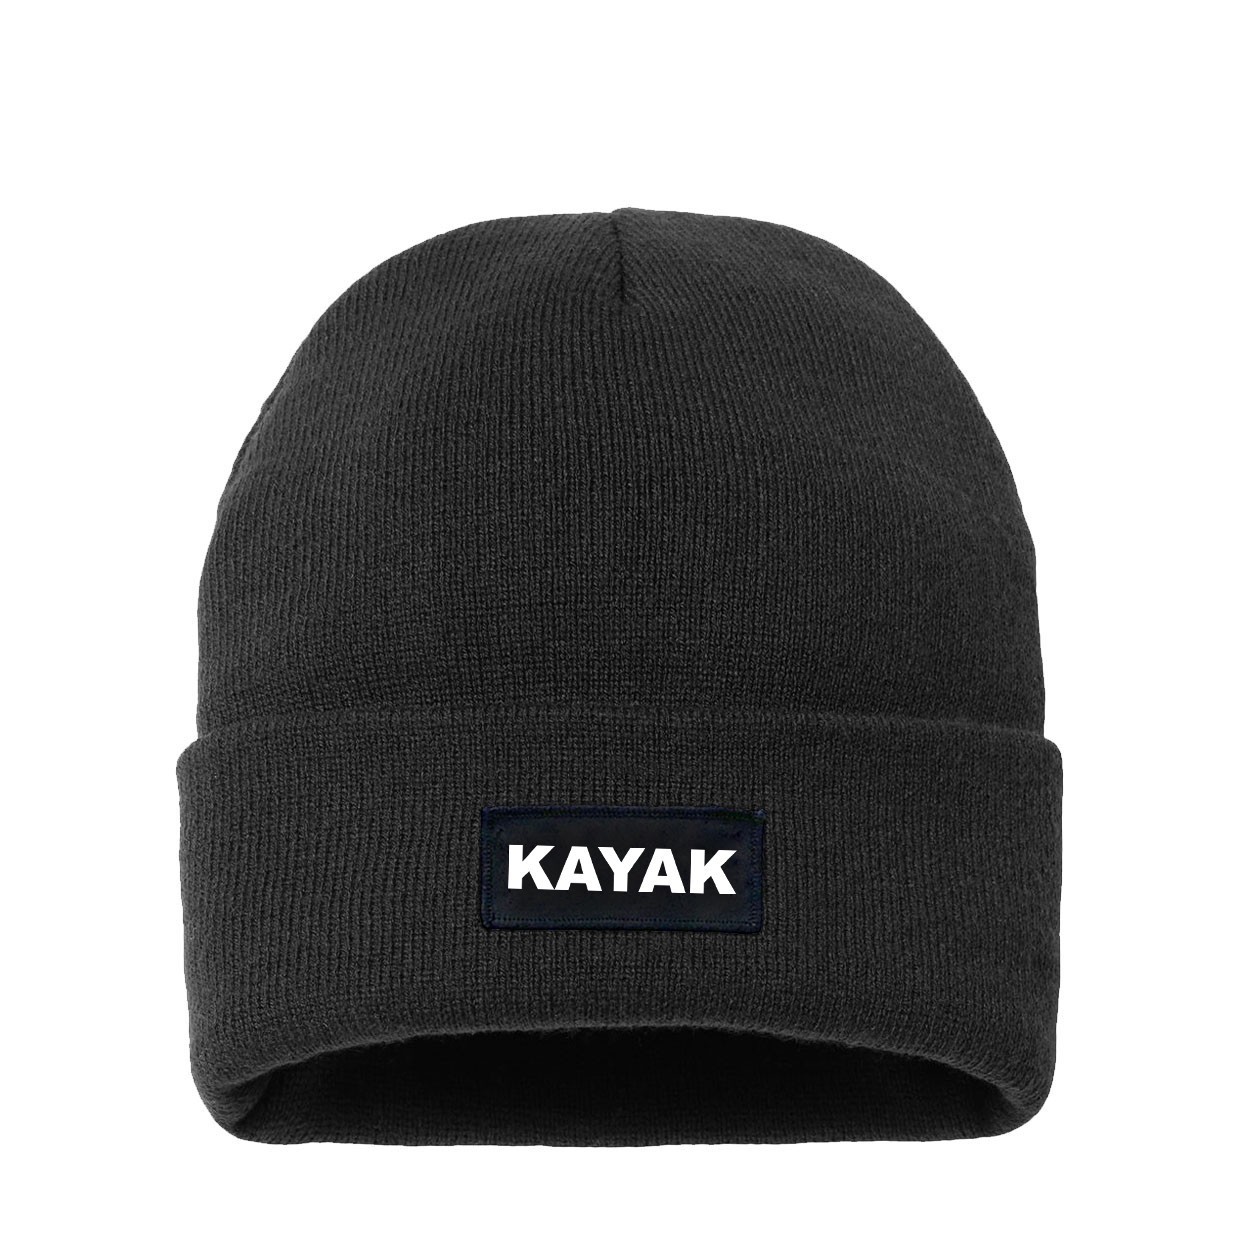 Kayak Brand Logo Night Out Woven Patch Night Out Sherpa Lined Cuffed Beanie Black